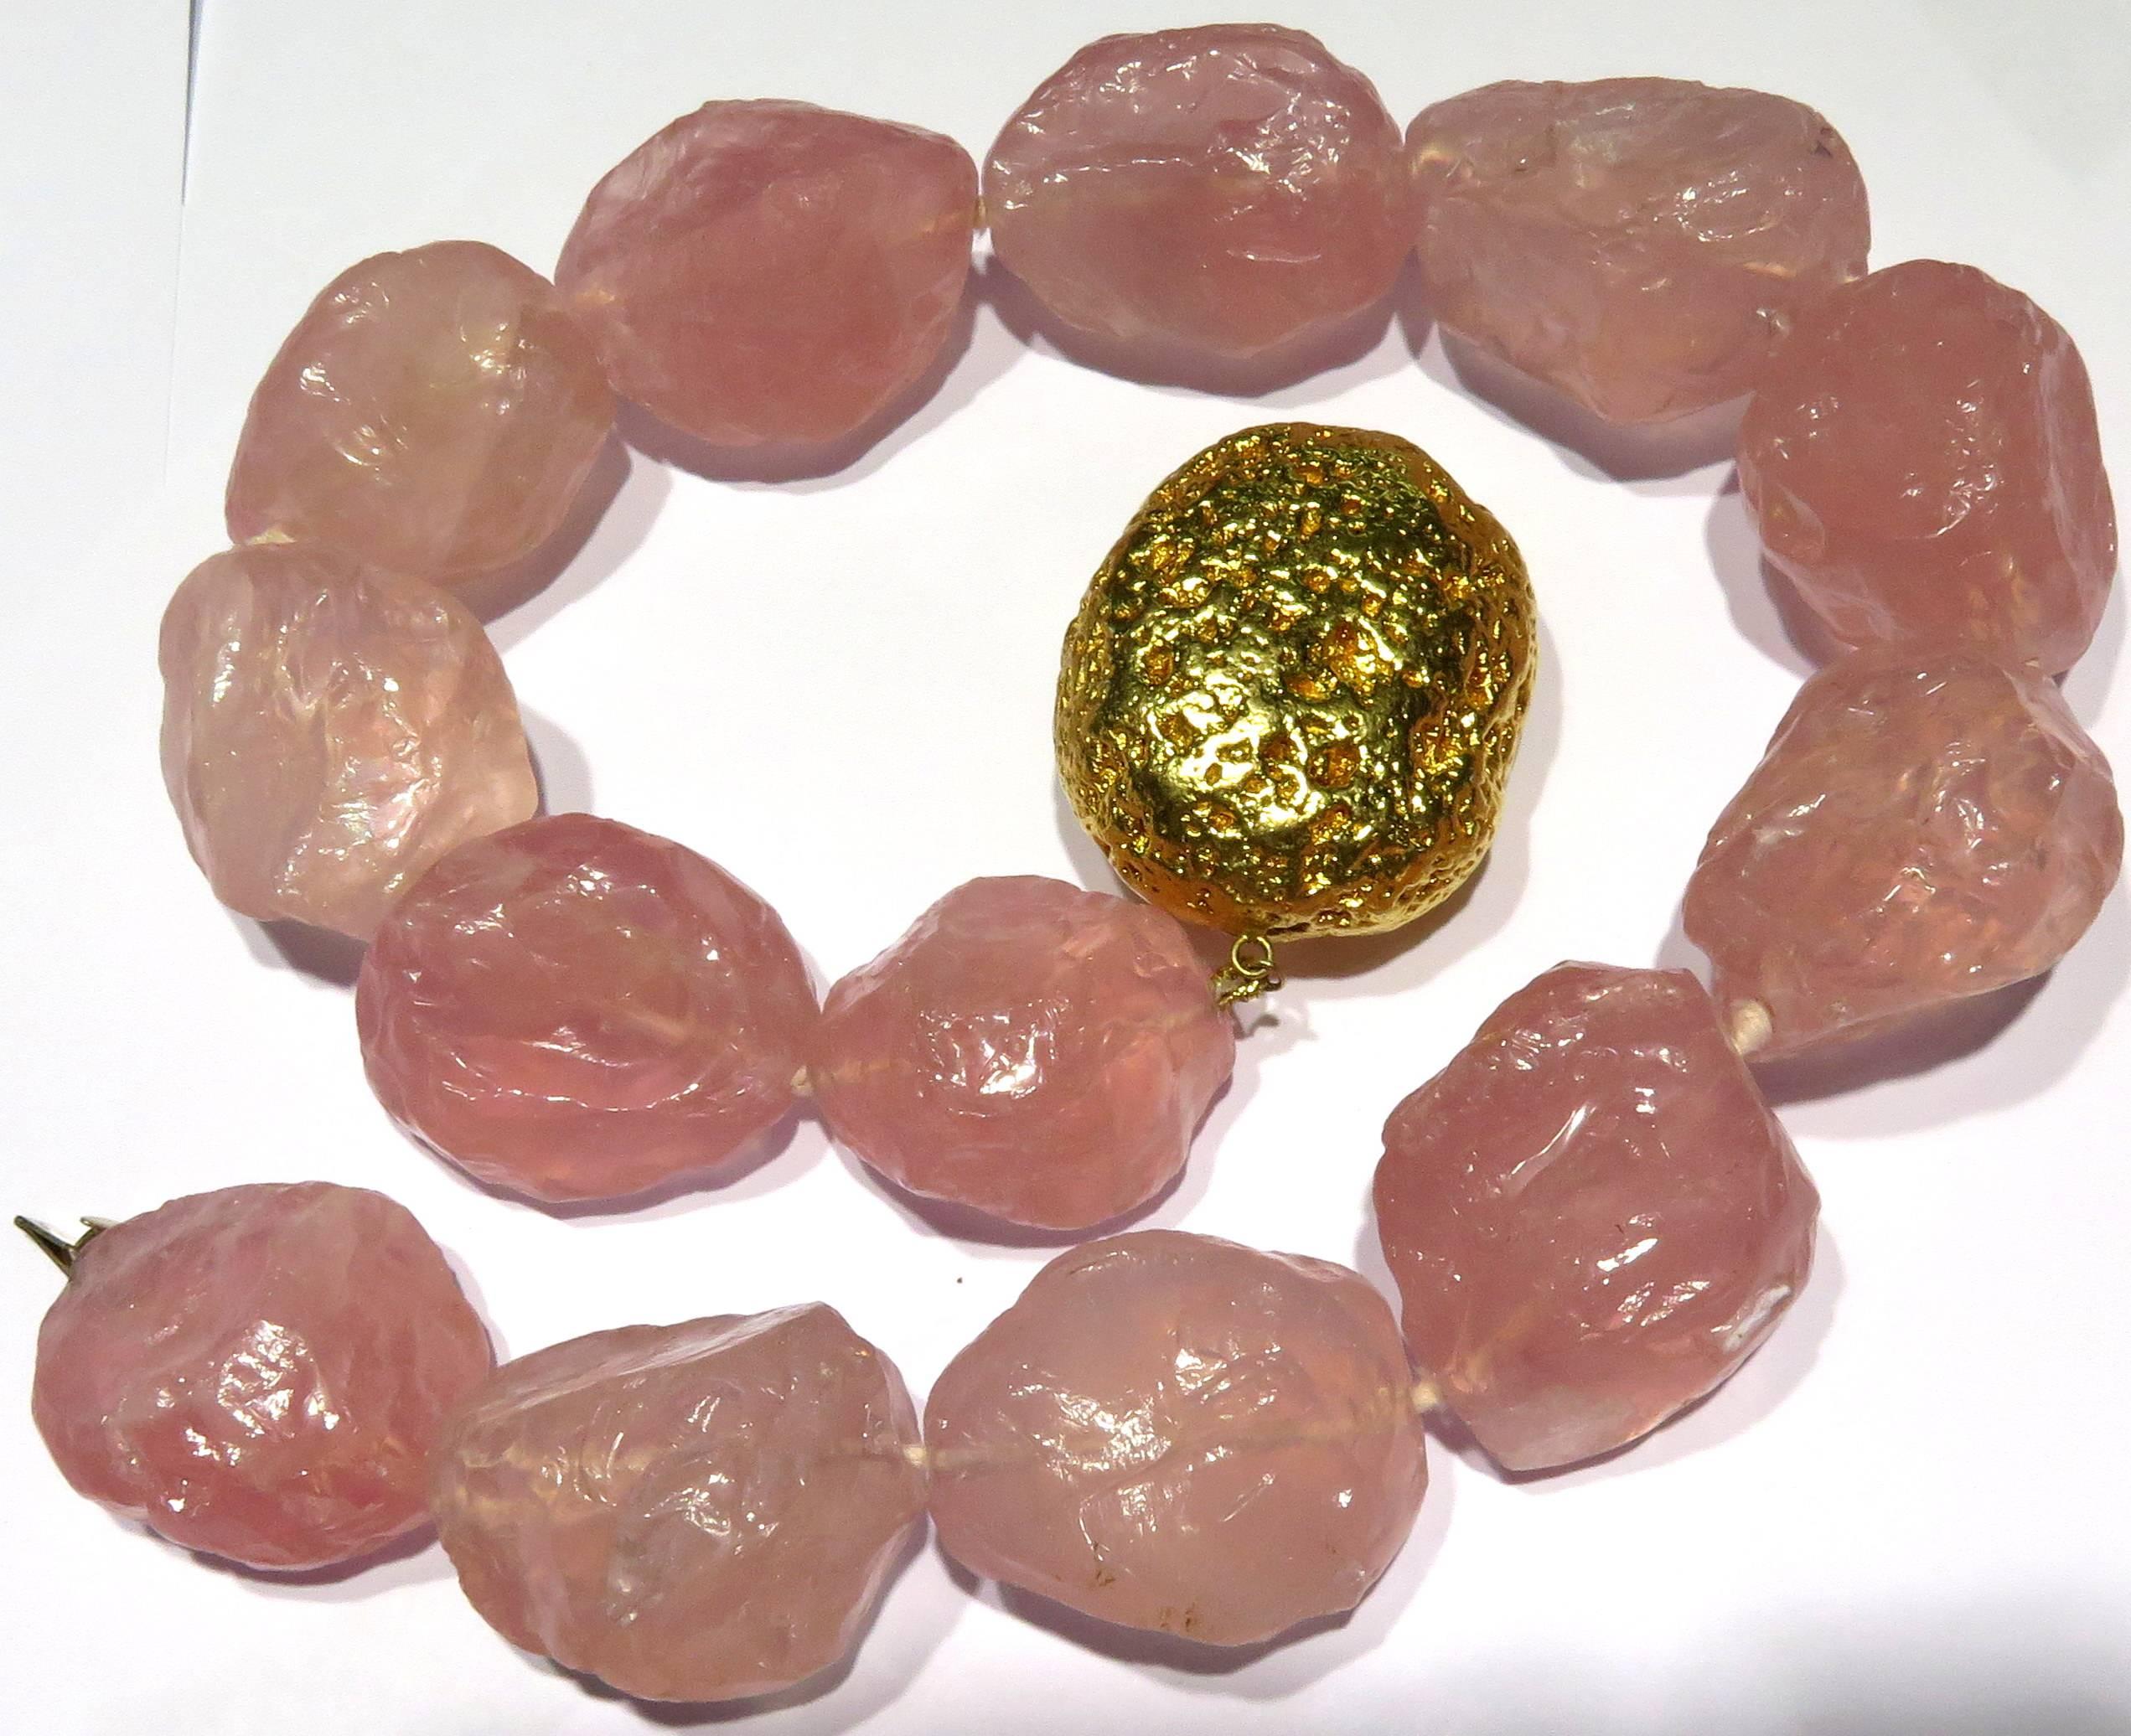 This Sergio Elefante 18k rose quartz necklace is about as bold as they come! Rumor has it Wilma Flintstone, of THE Flintsone's of Bedrock once owned this incredible necklace. These rose quartz boulders are finished with a huge, but hollow, 18k